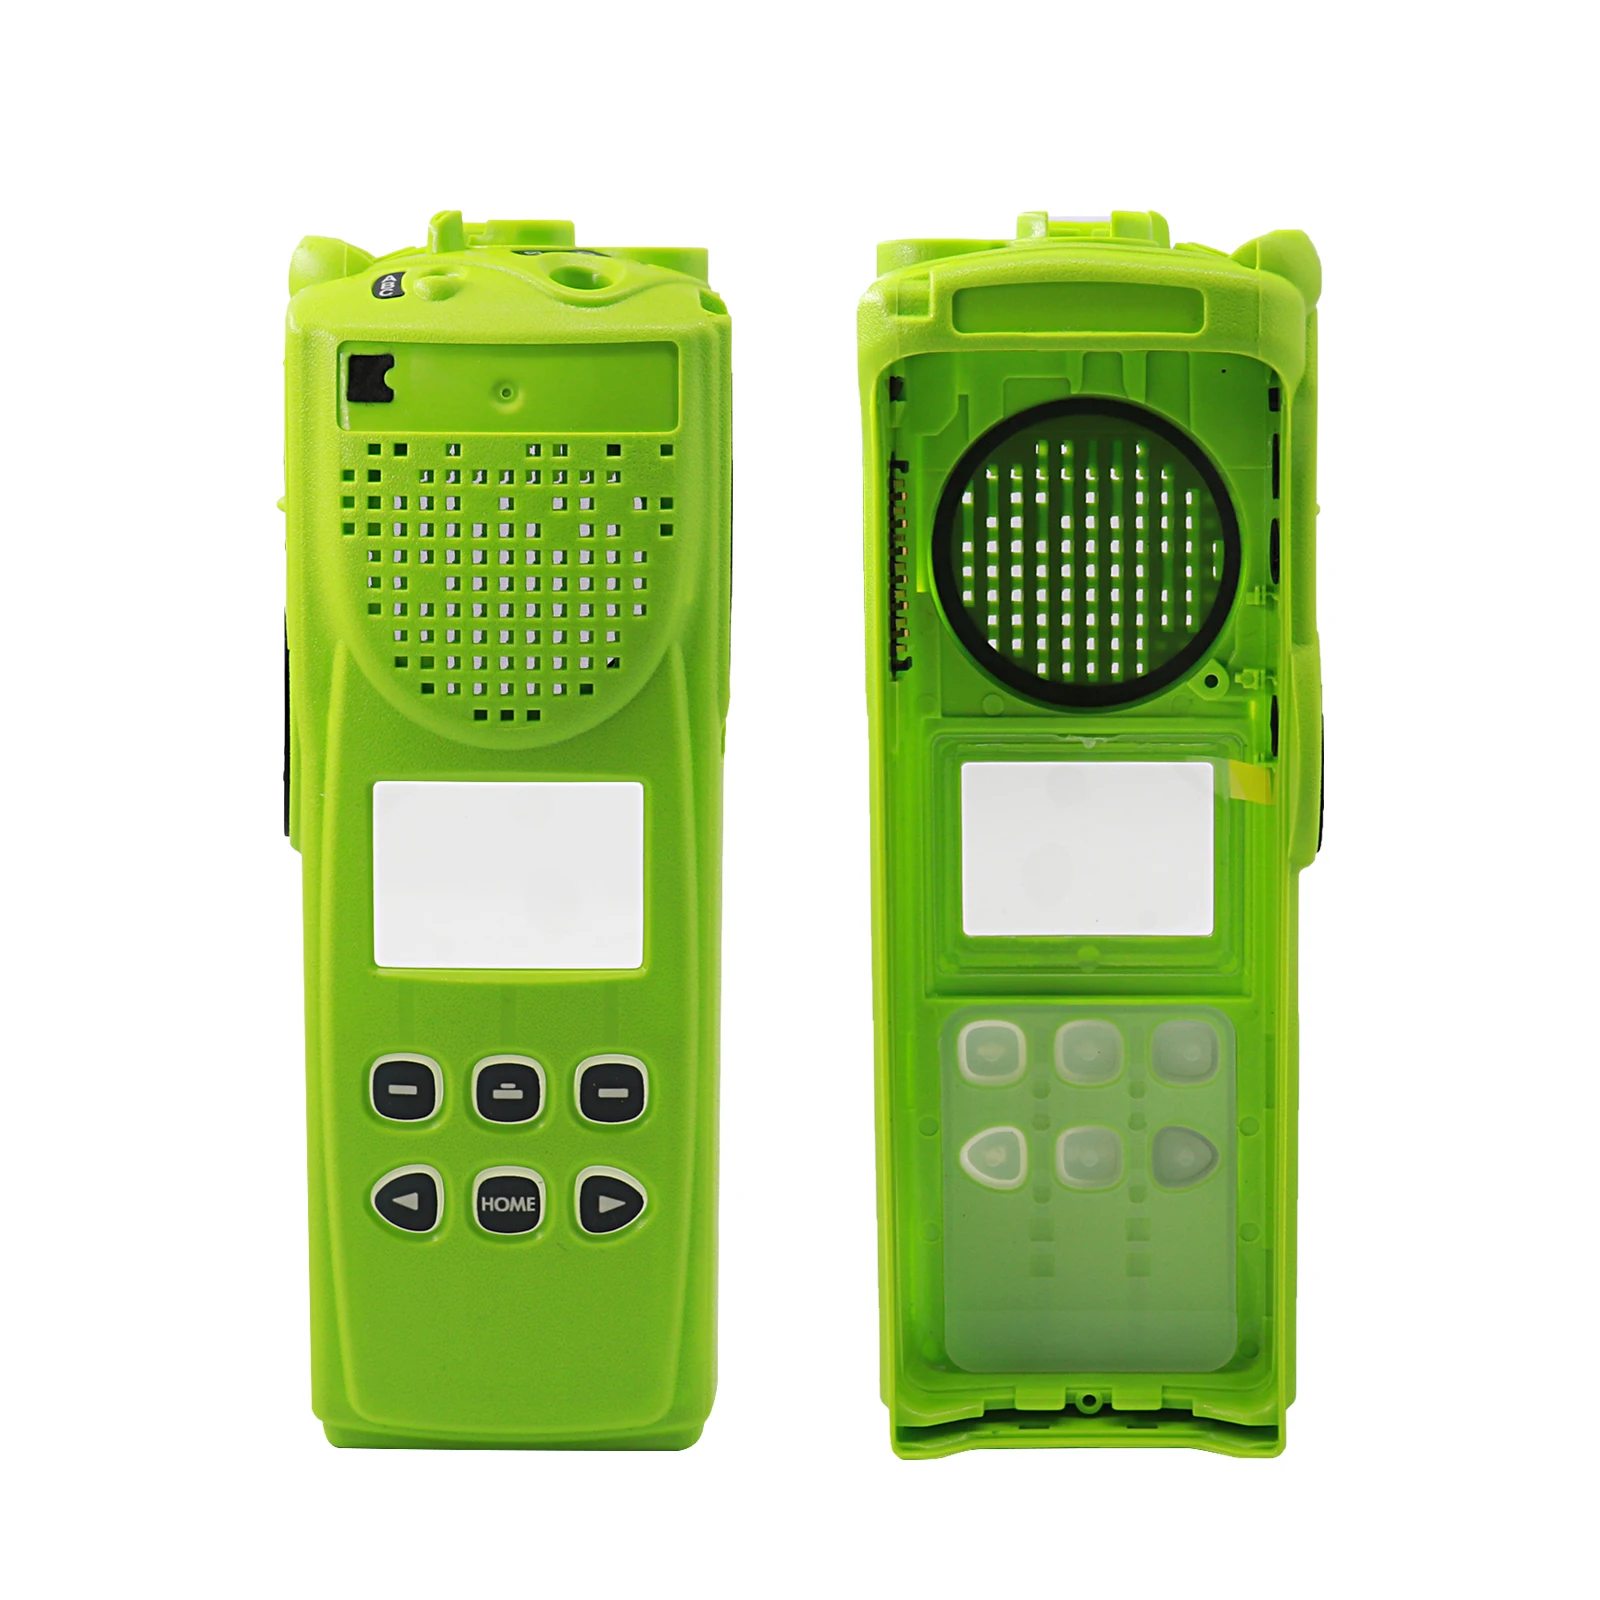 Green Walkie Talkie Limited Keypad Repair Housing Case Cover Kit fit for XTS3000 M2 Model 2 Two Way Radio-VBLL